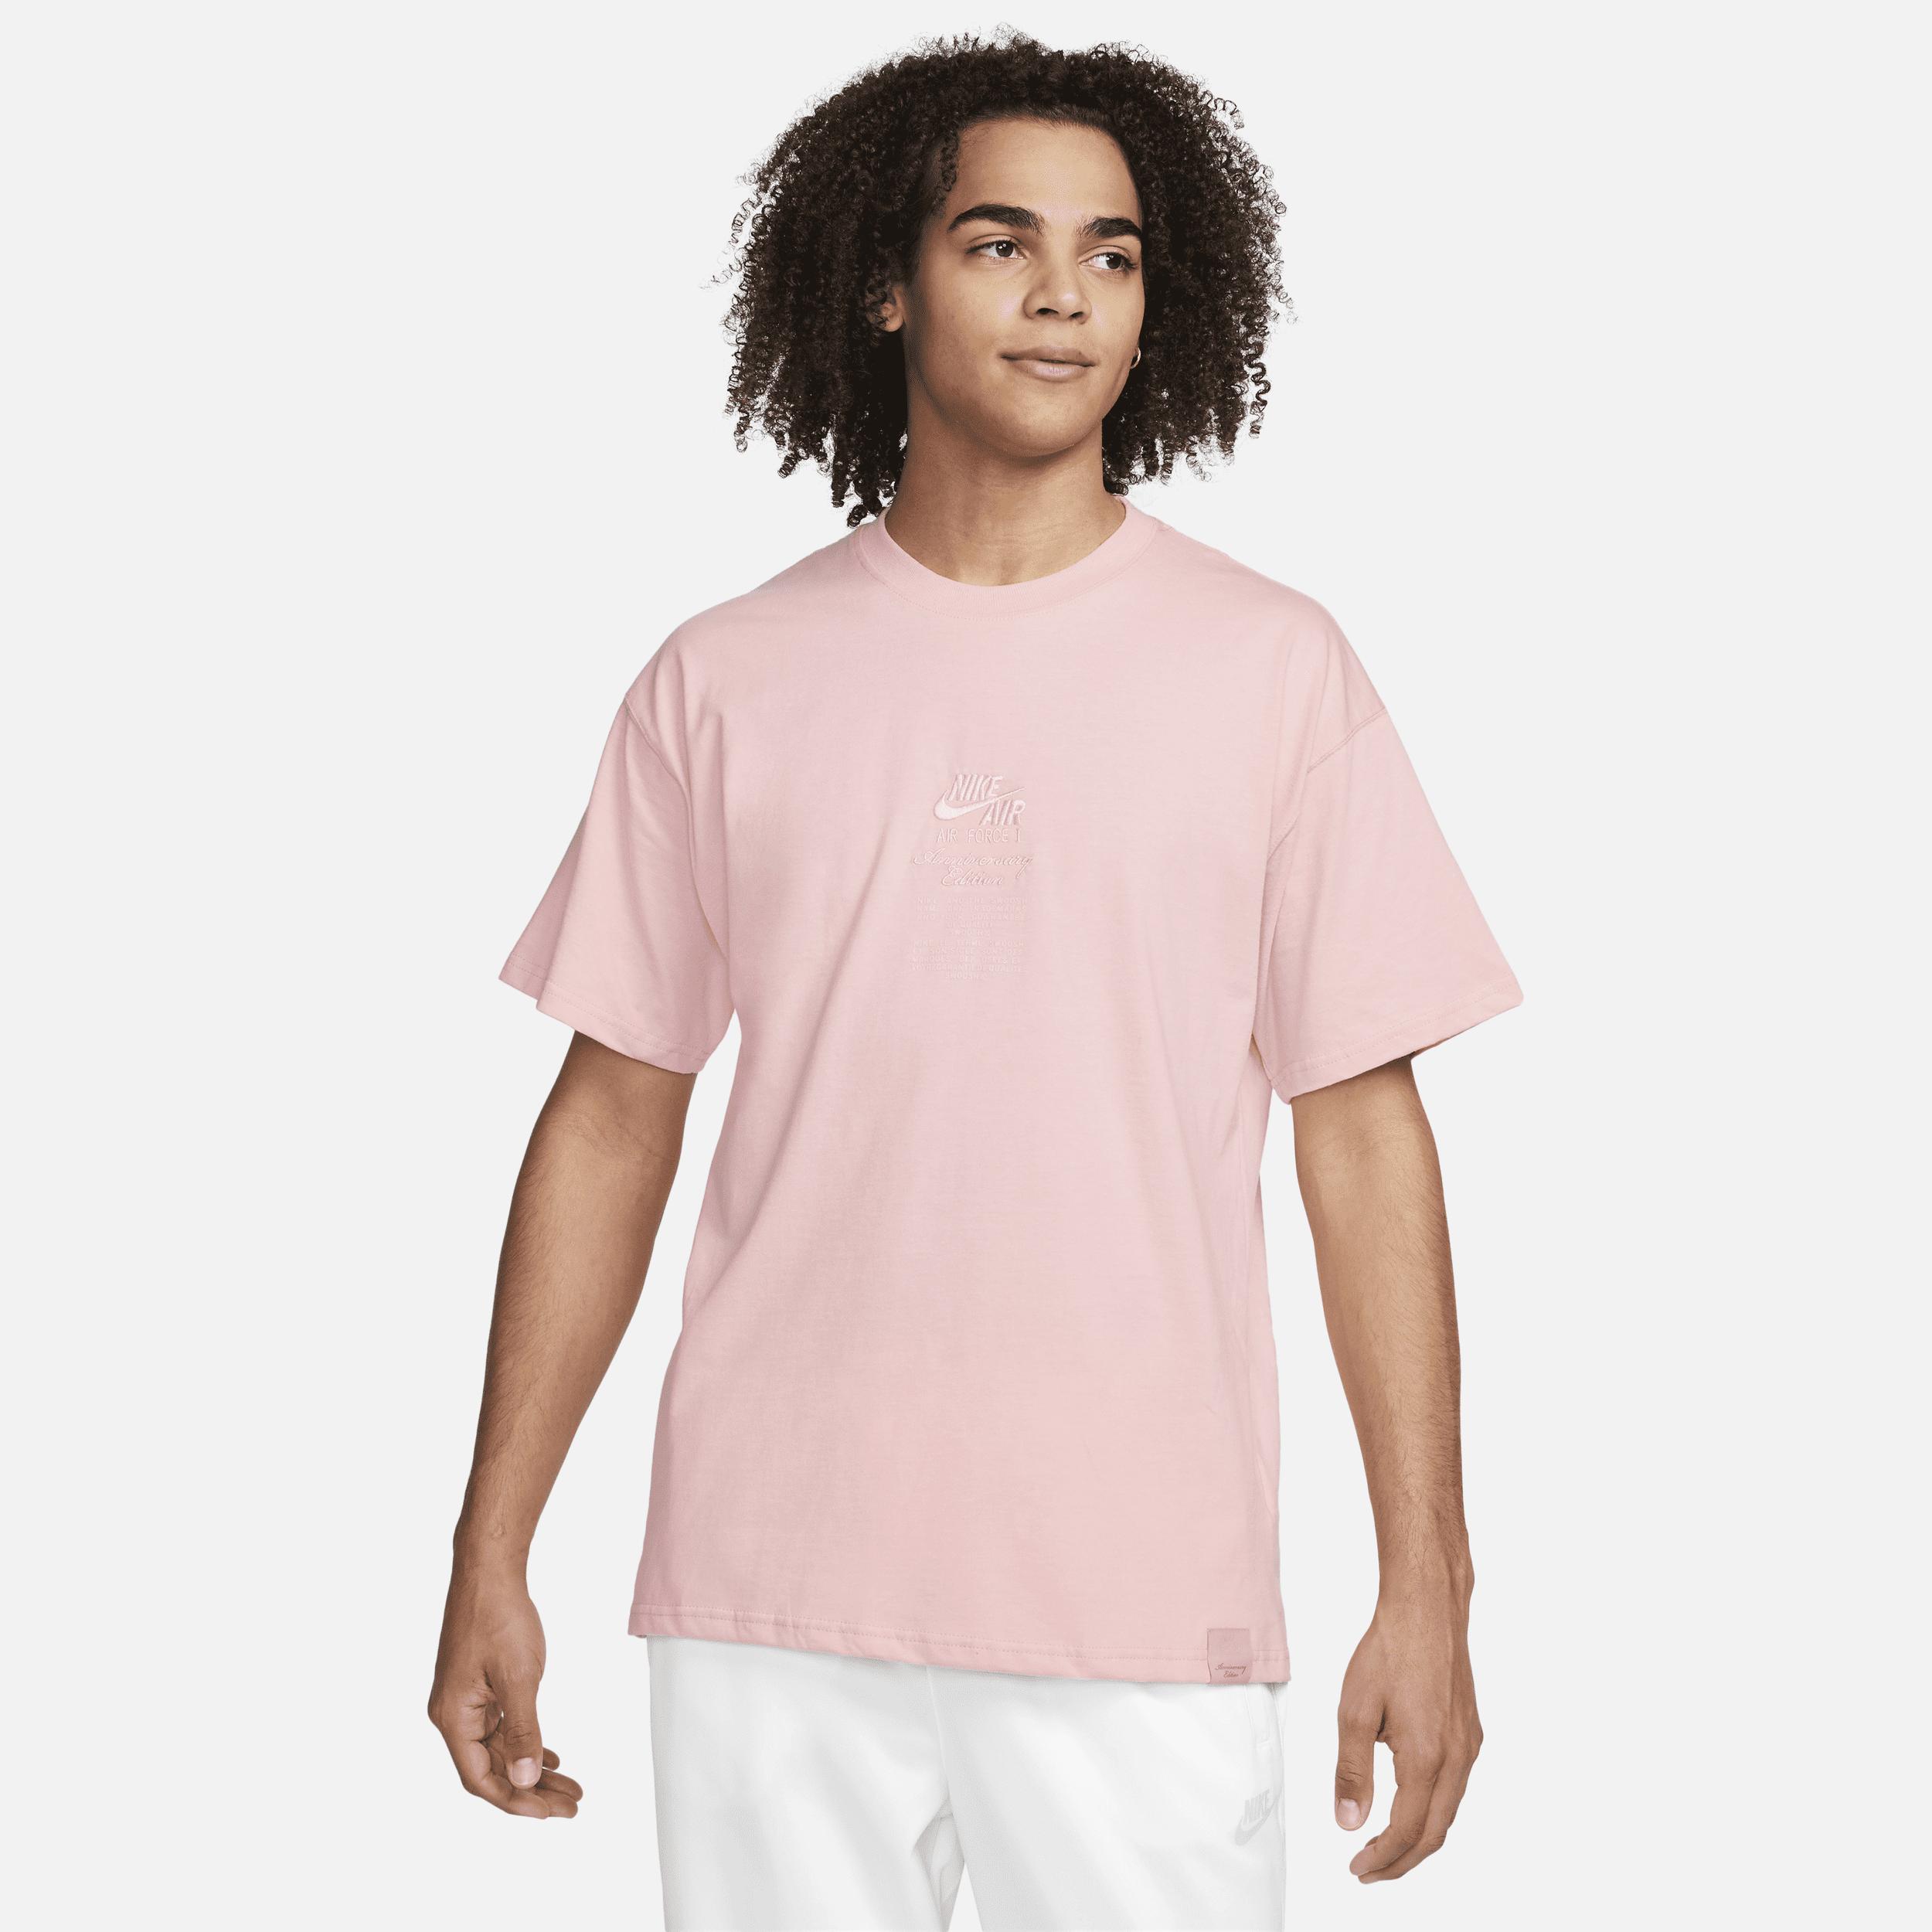 Nike Sportswear Af1 40th Anniversary Max90 T-shirt in Pink for Men